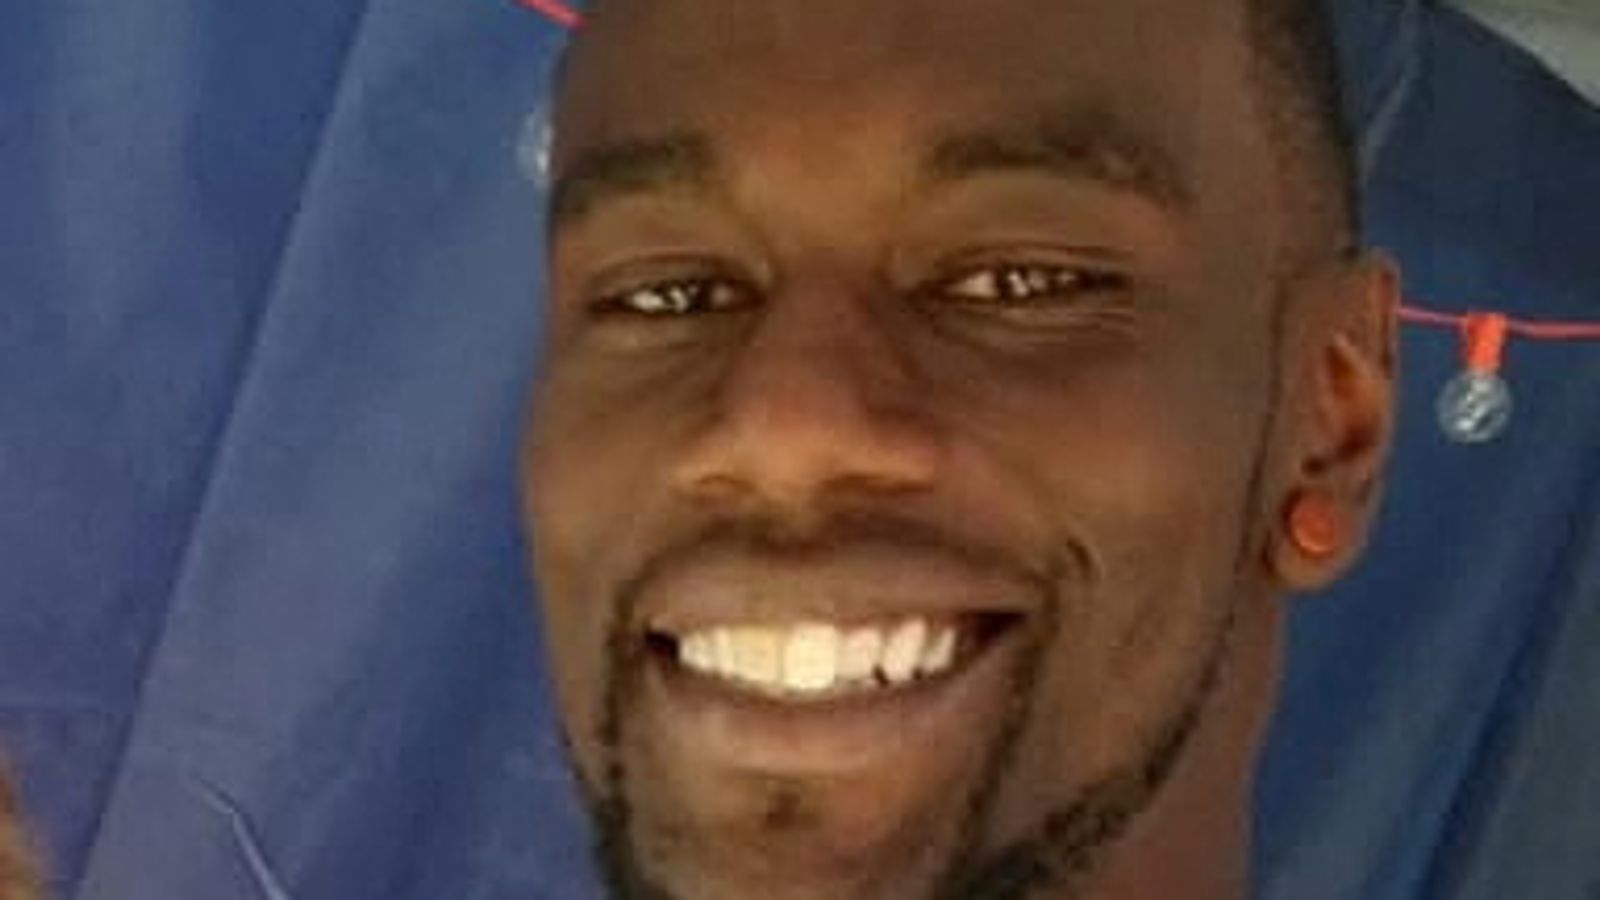 Tyre Nichols killing: Last words of US man who died after police 'beating' were 'mum, mum, mum', says lawyer